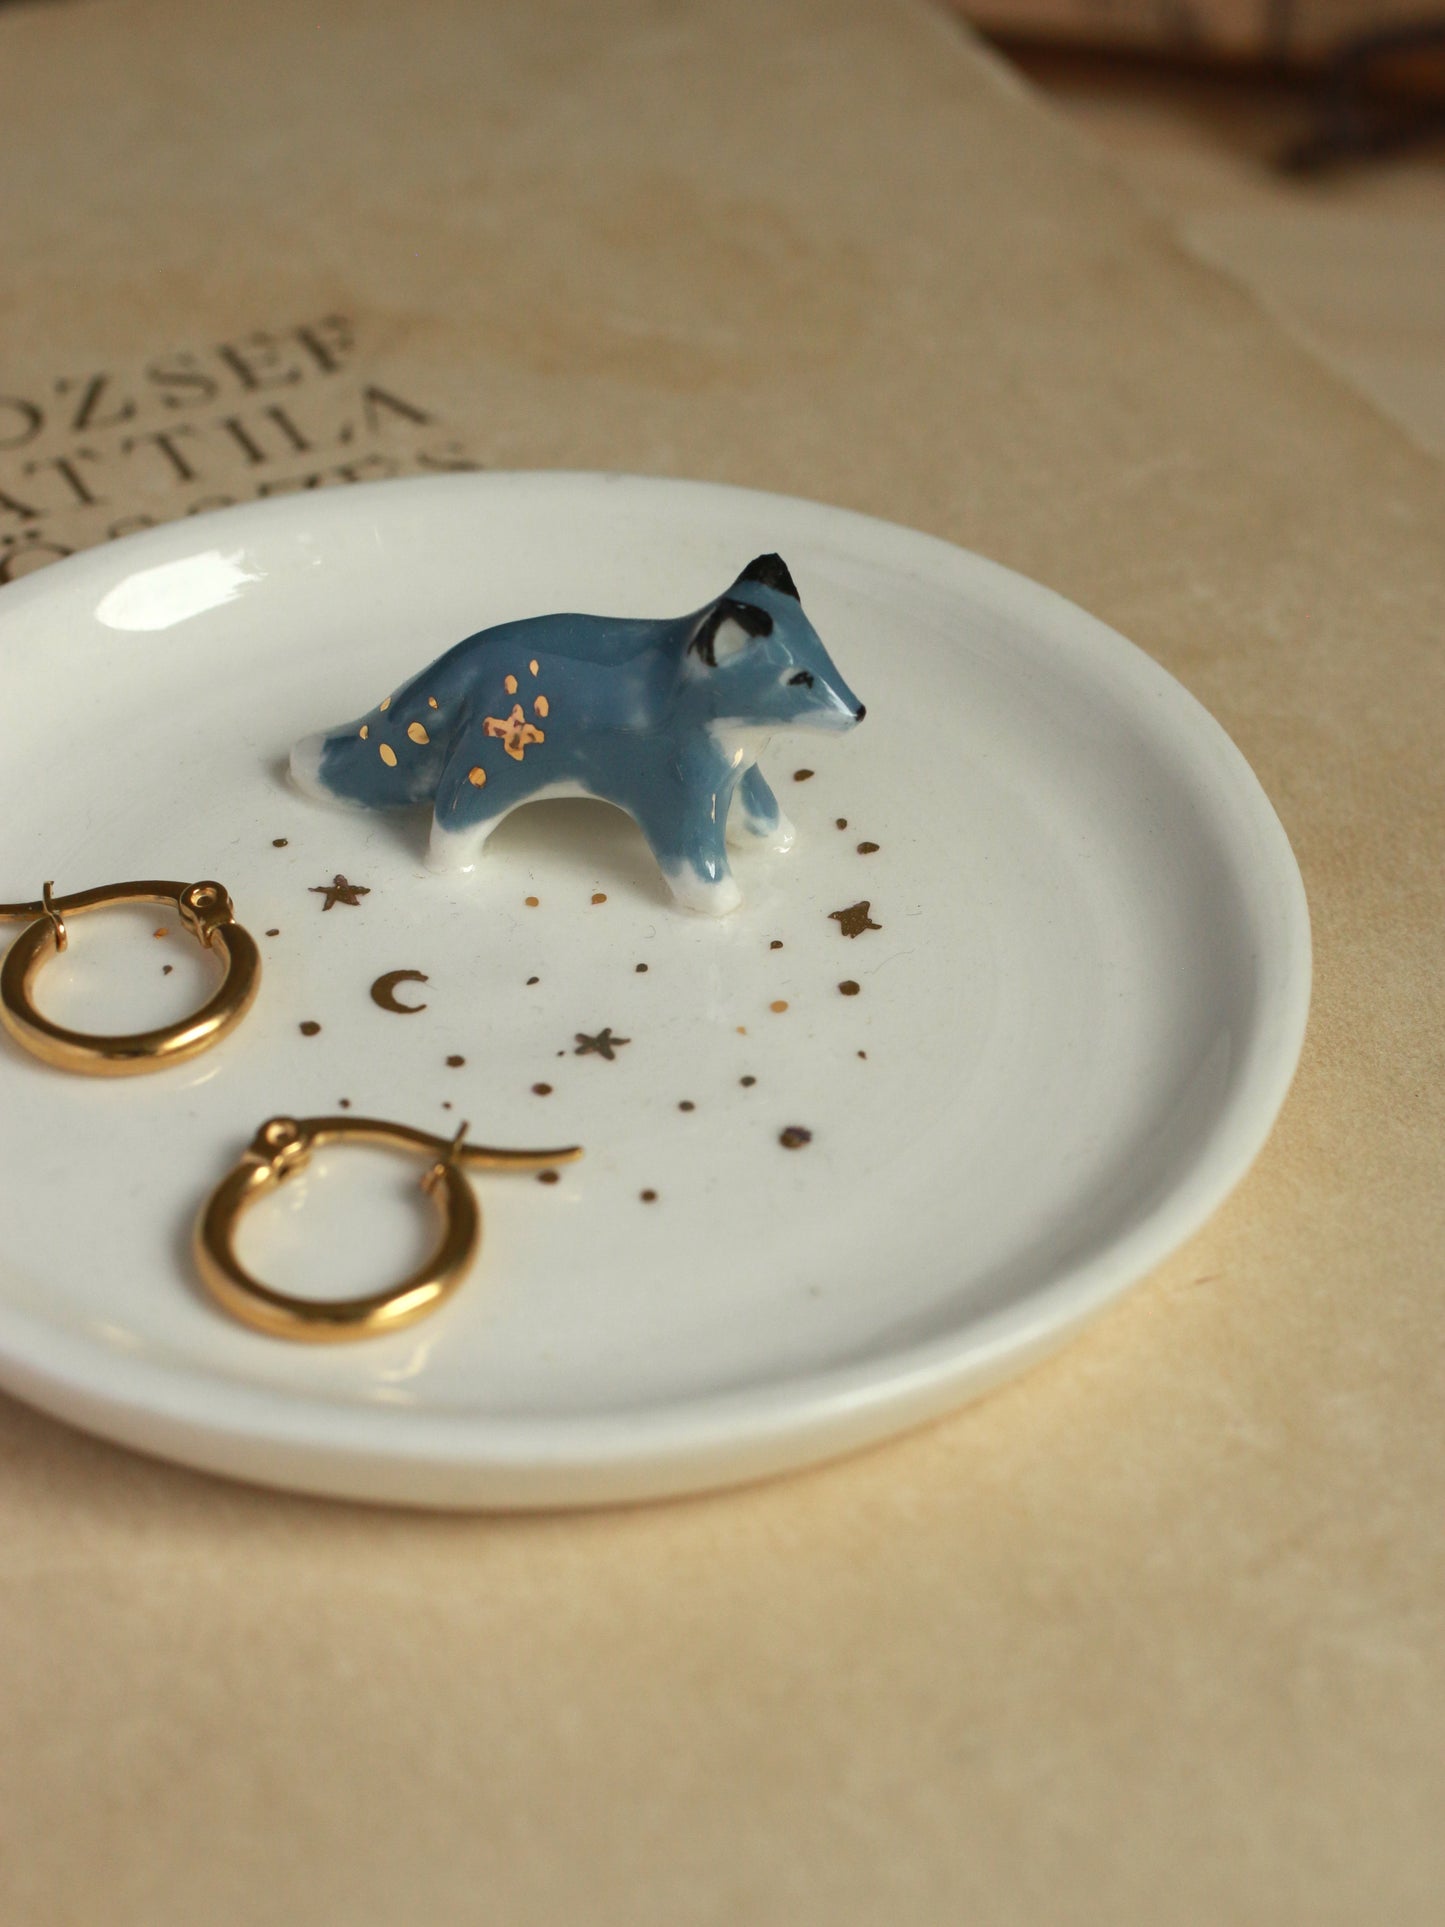 Wolf Ring Dish - Porcelain jewelry dish